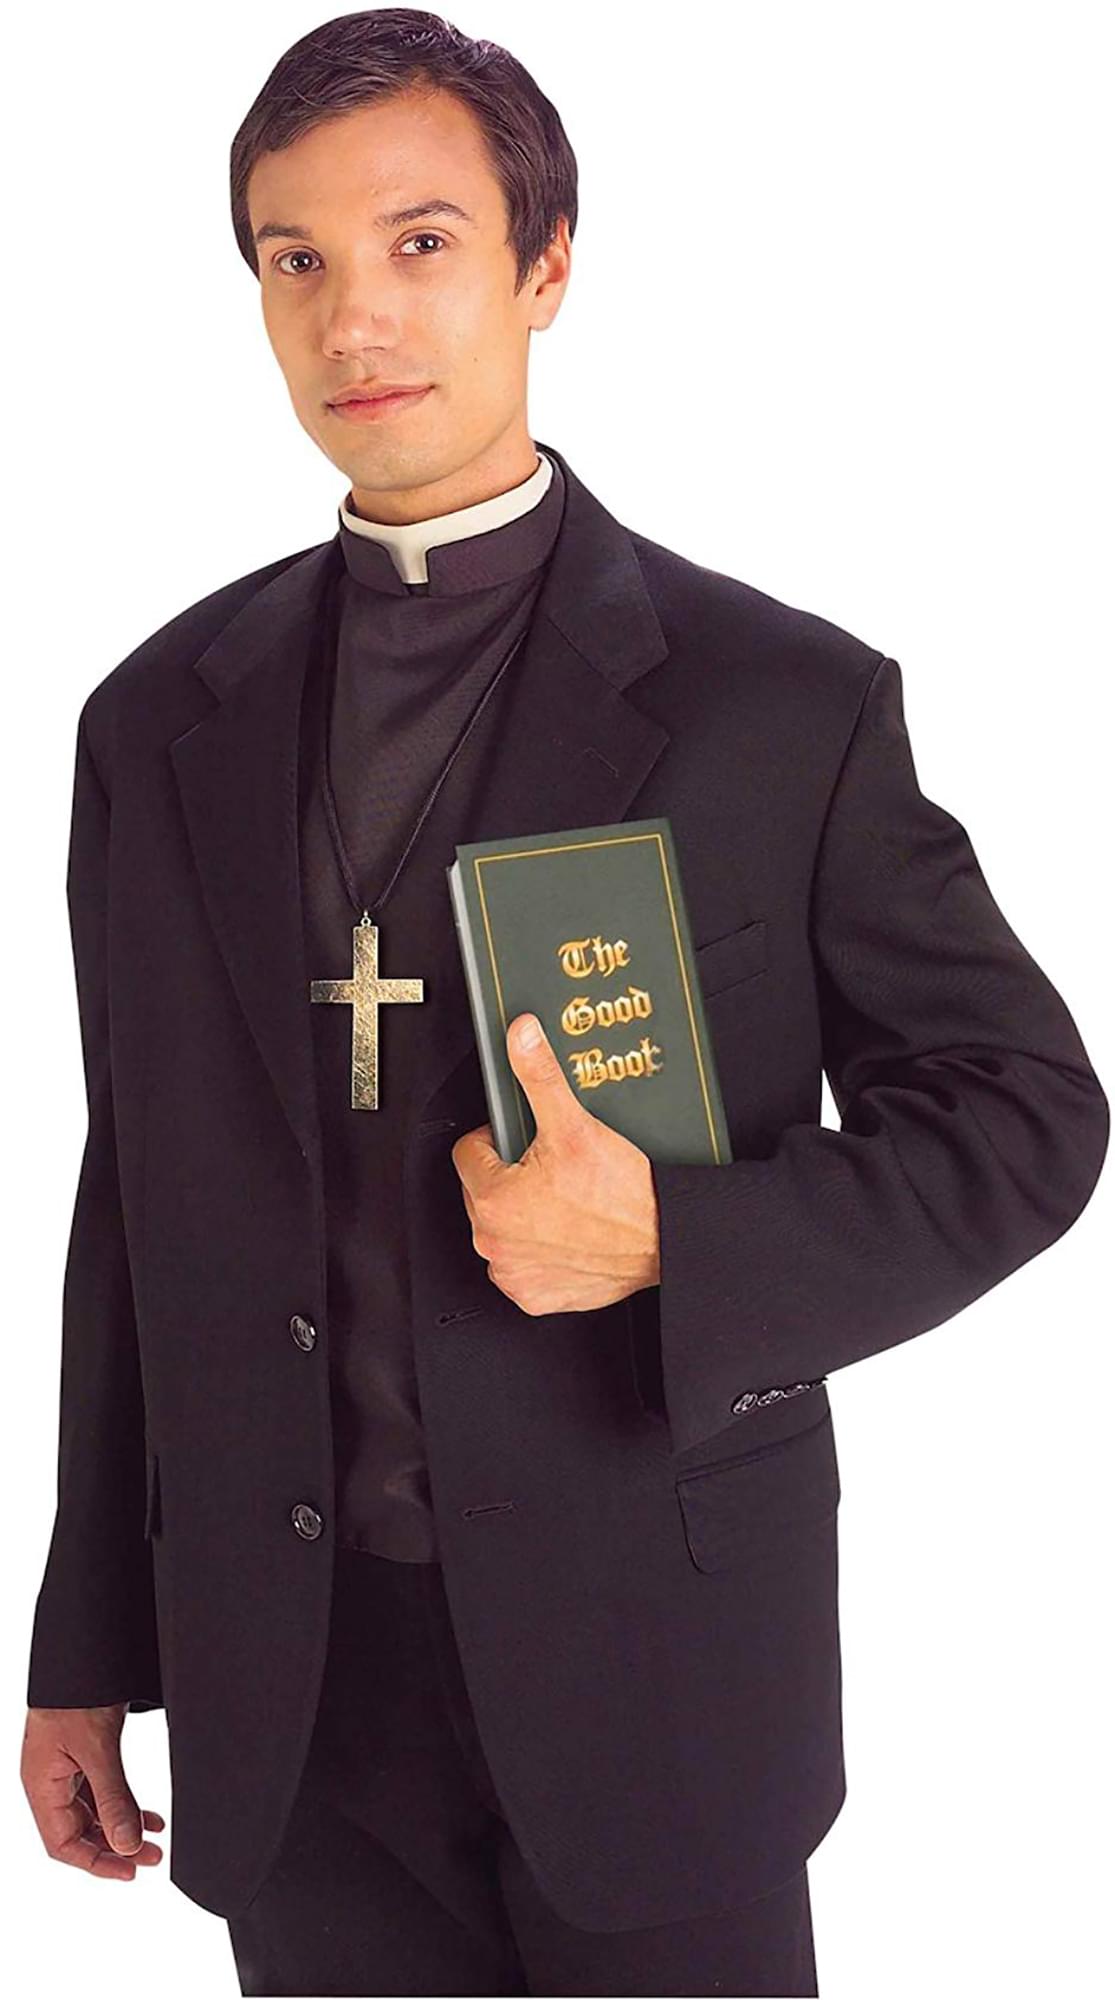 Priest Costume Shirt Front With Collar